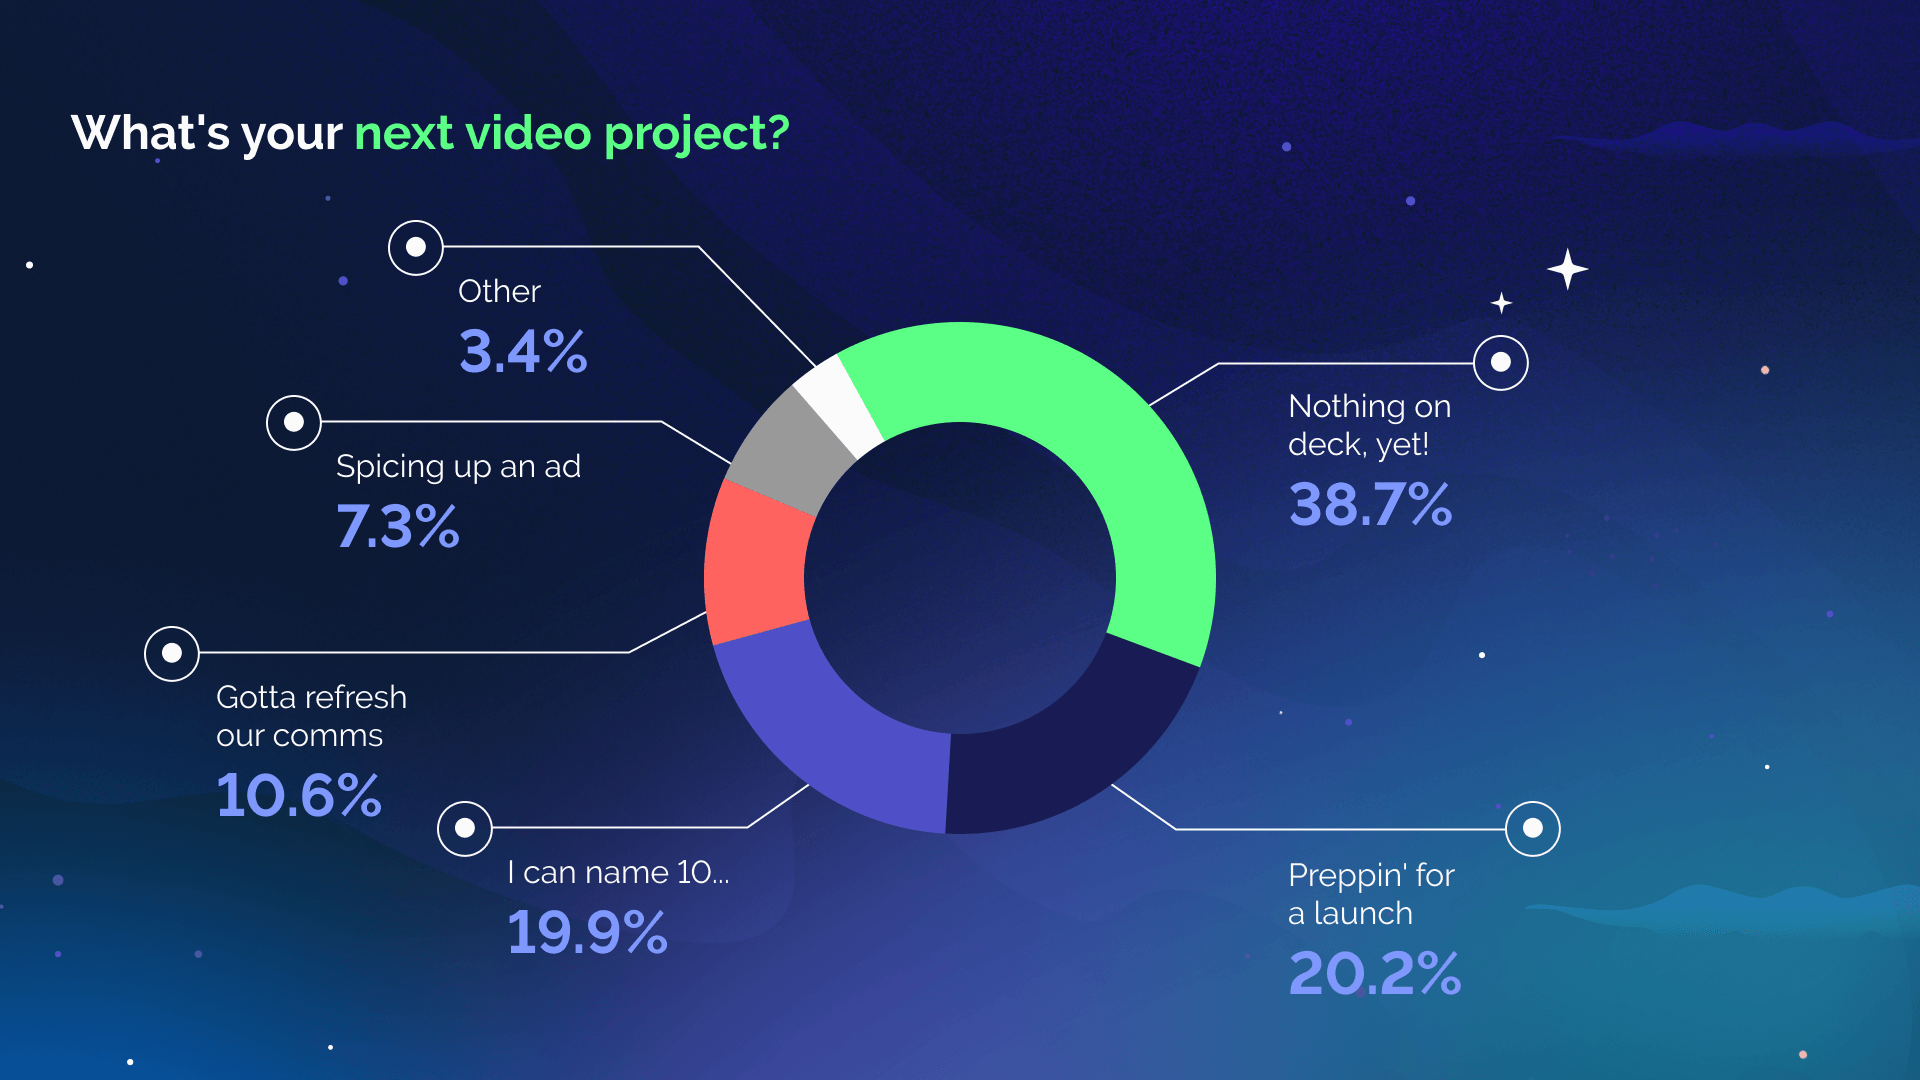 What's your next video project?